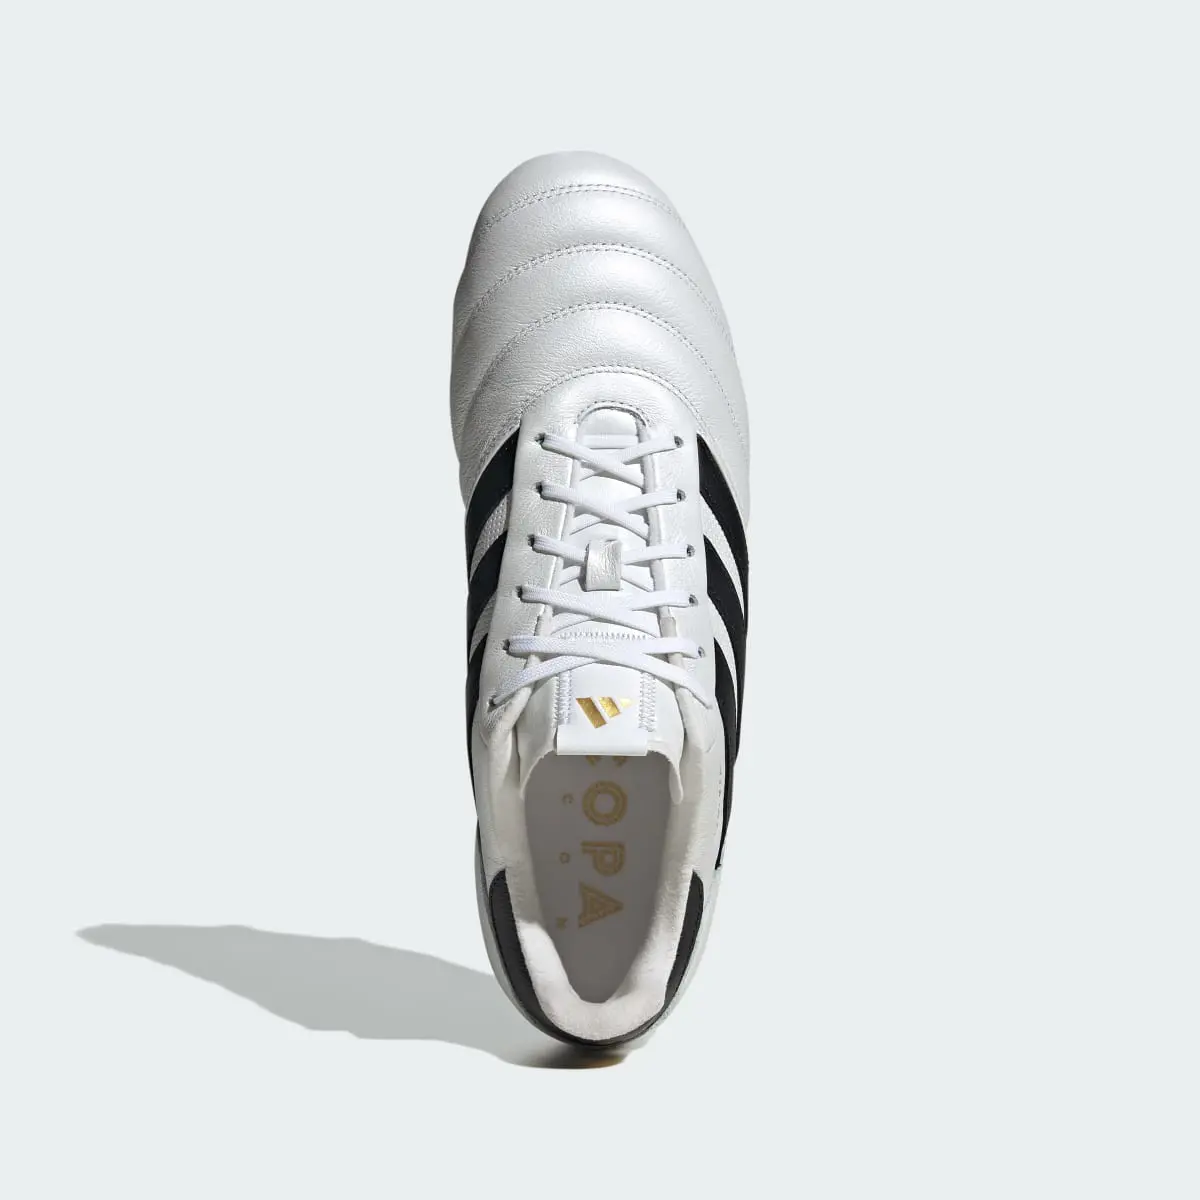 Adidas Copa Icon Firm Ground Boots. 3